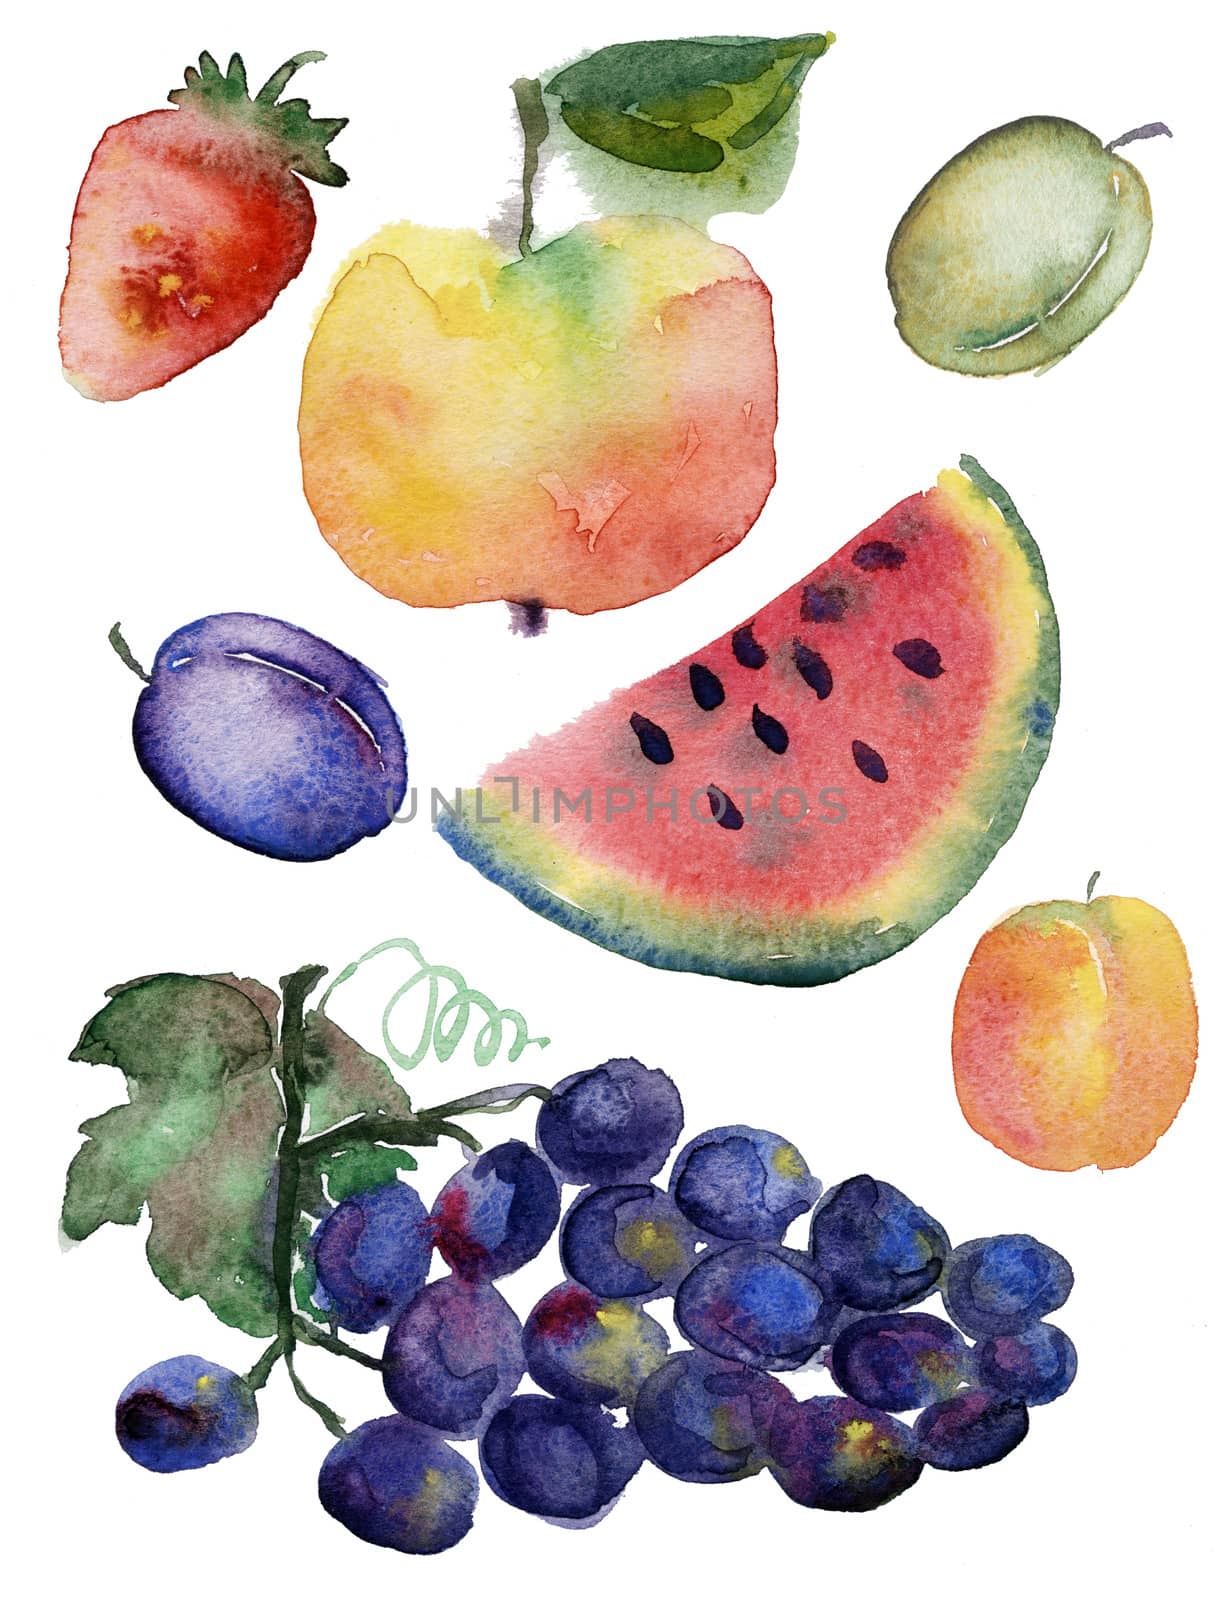 Fruit set drawn watercolor blots and stains with a spray :  watermelon, apple ,strawberry, peach, plum, grapes